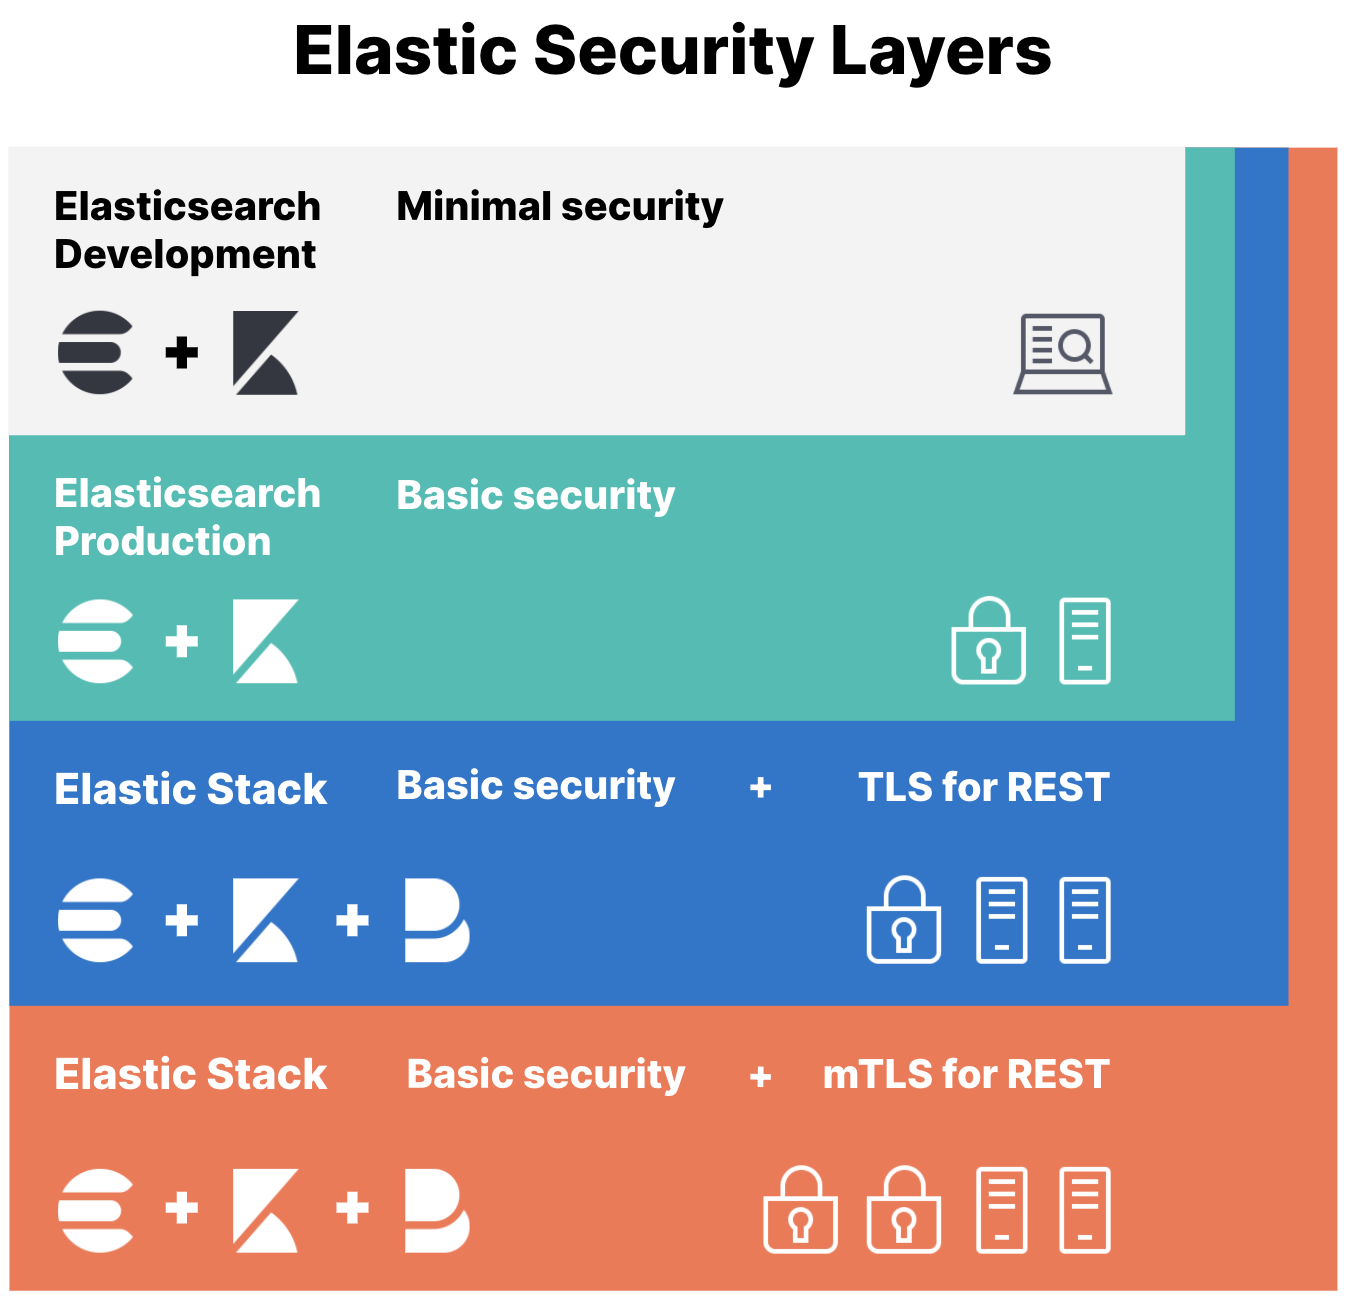 Elastic Security layers